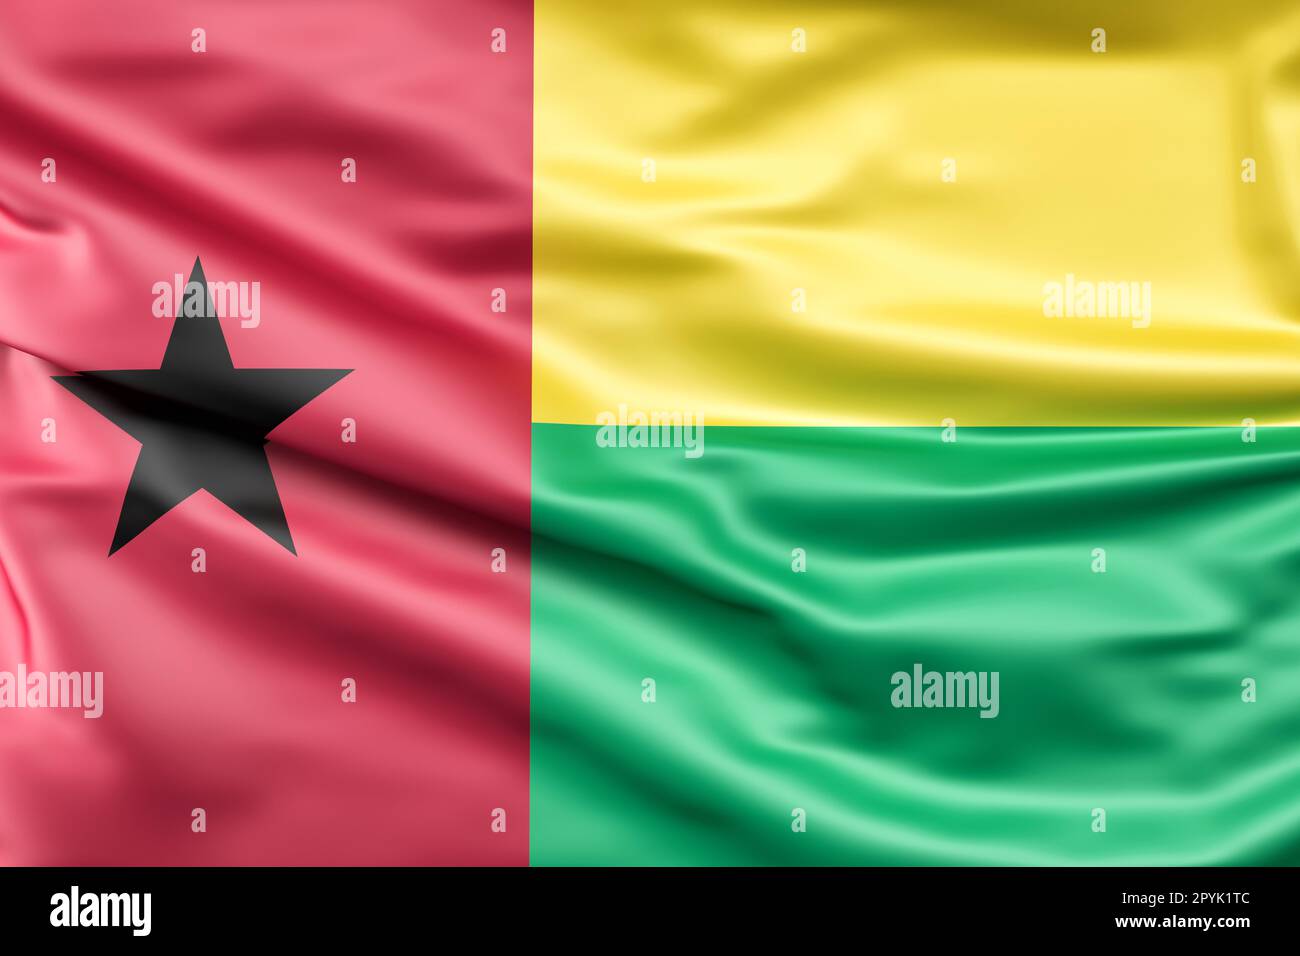 Ruffled Flag Of Guinea-Bissau. 3D Rendering Stock Photo